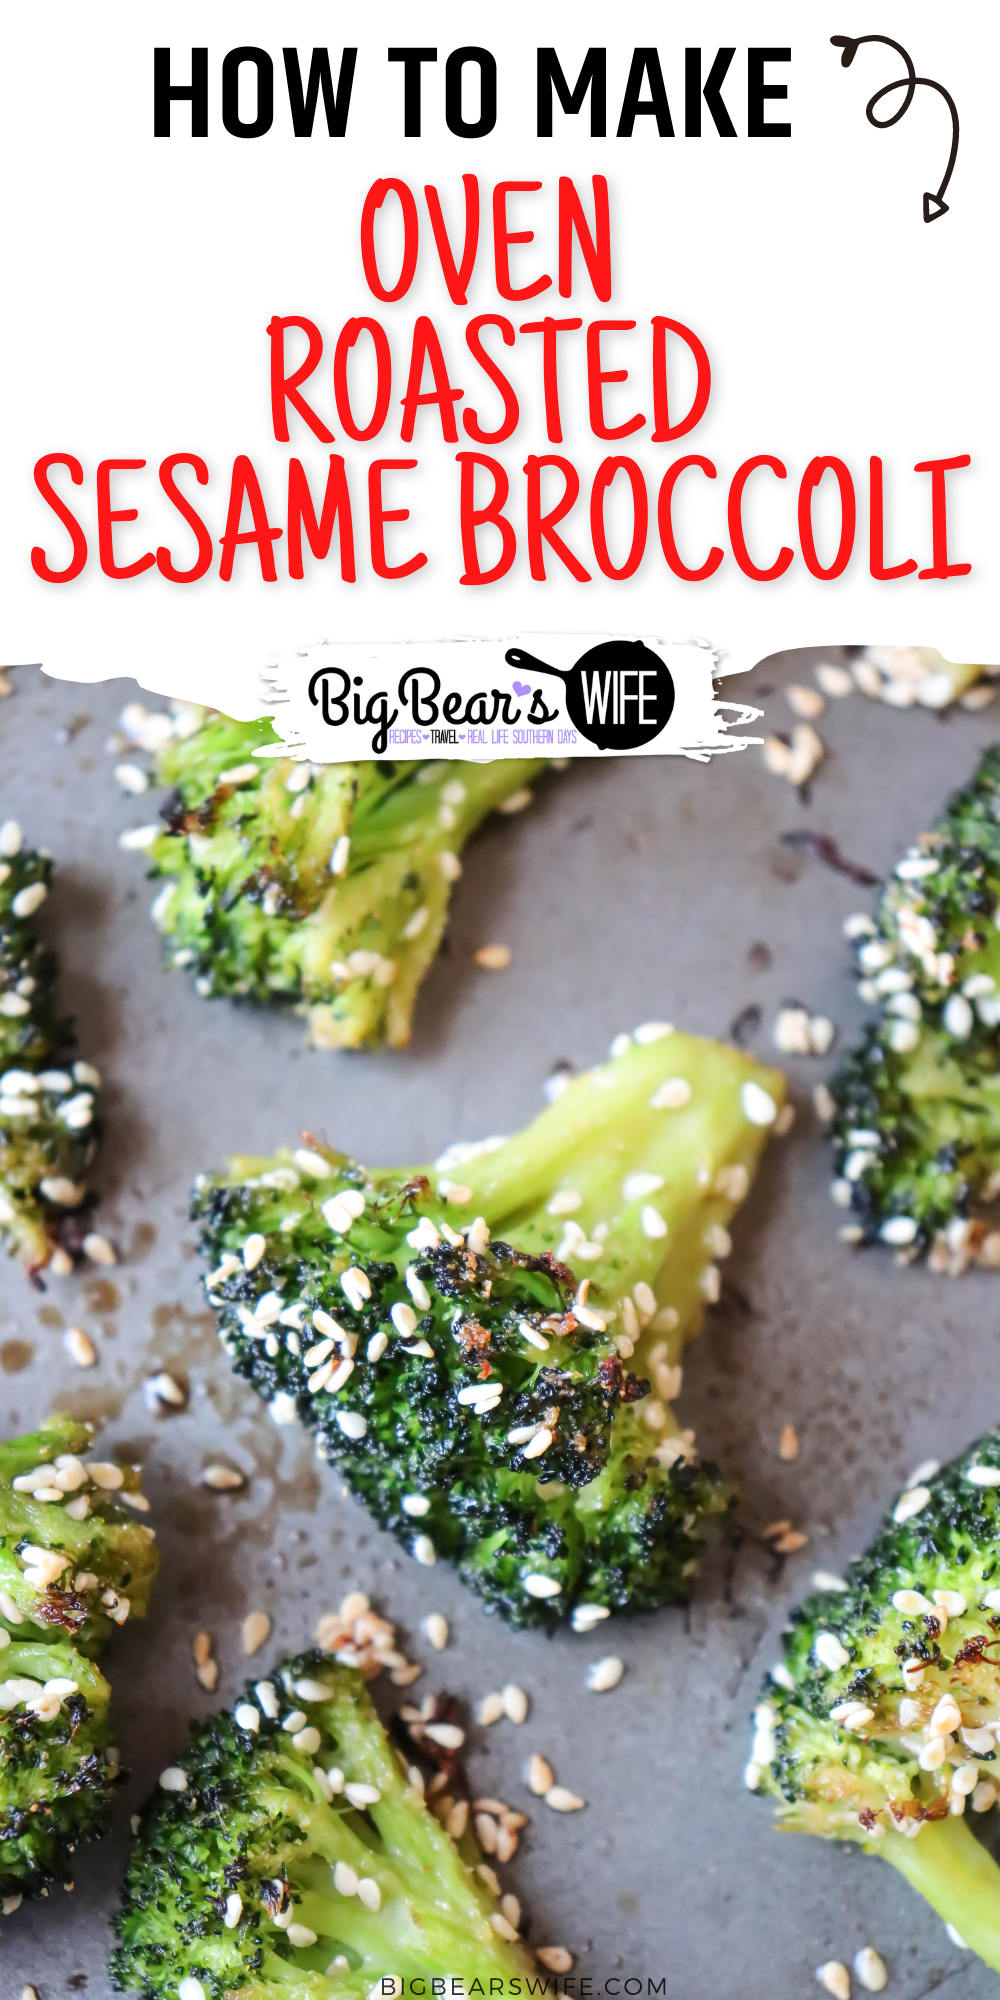 Super simple and quick Oven Roasted Sesame Broccoli is a great side dish that is ready in under 30 minutes! via @bigbearswife